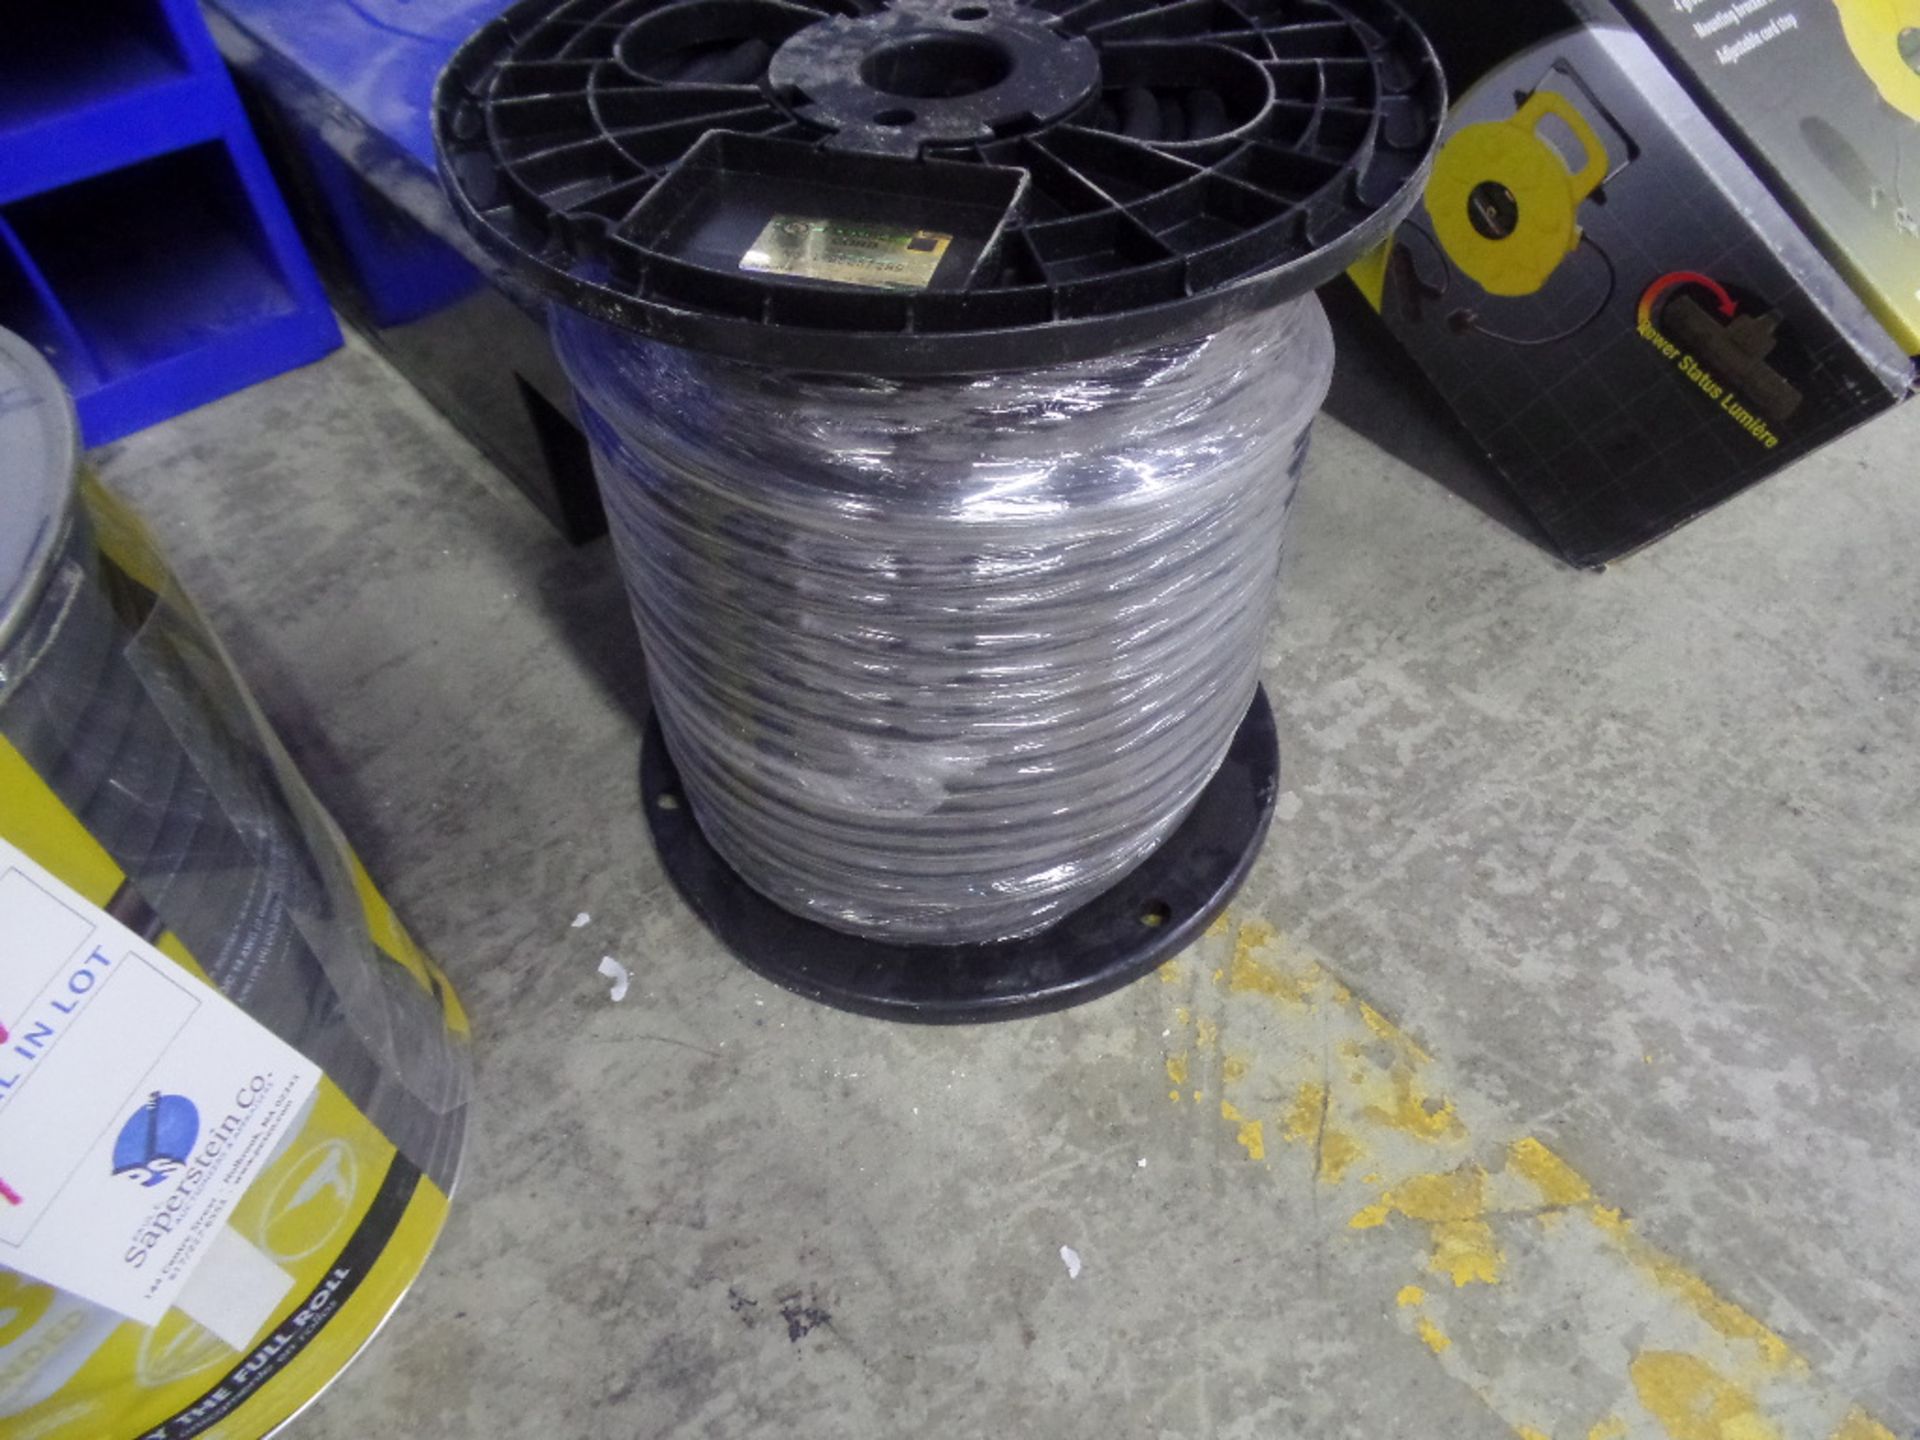 Spool of Electrical Cable